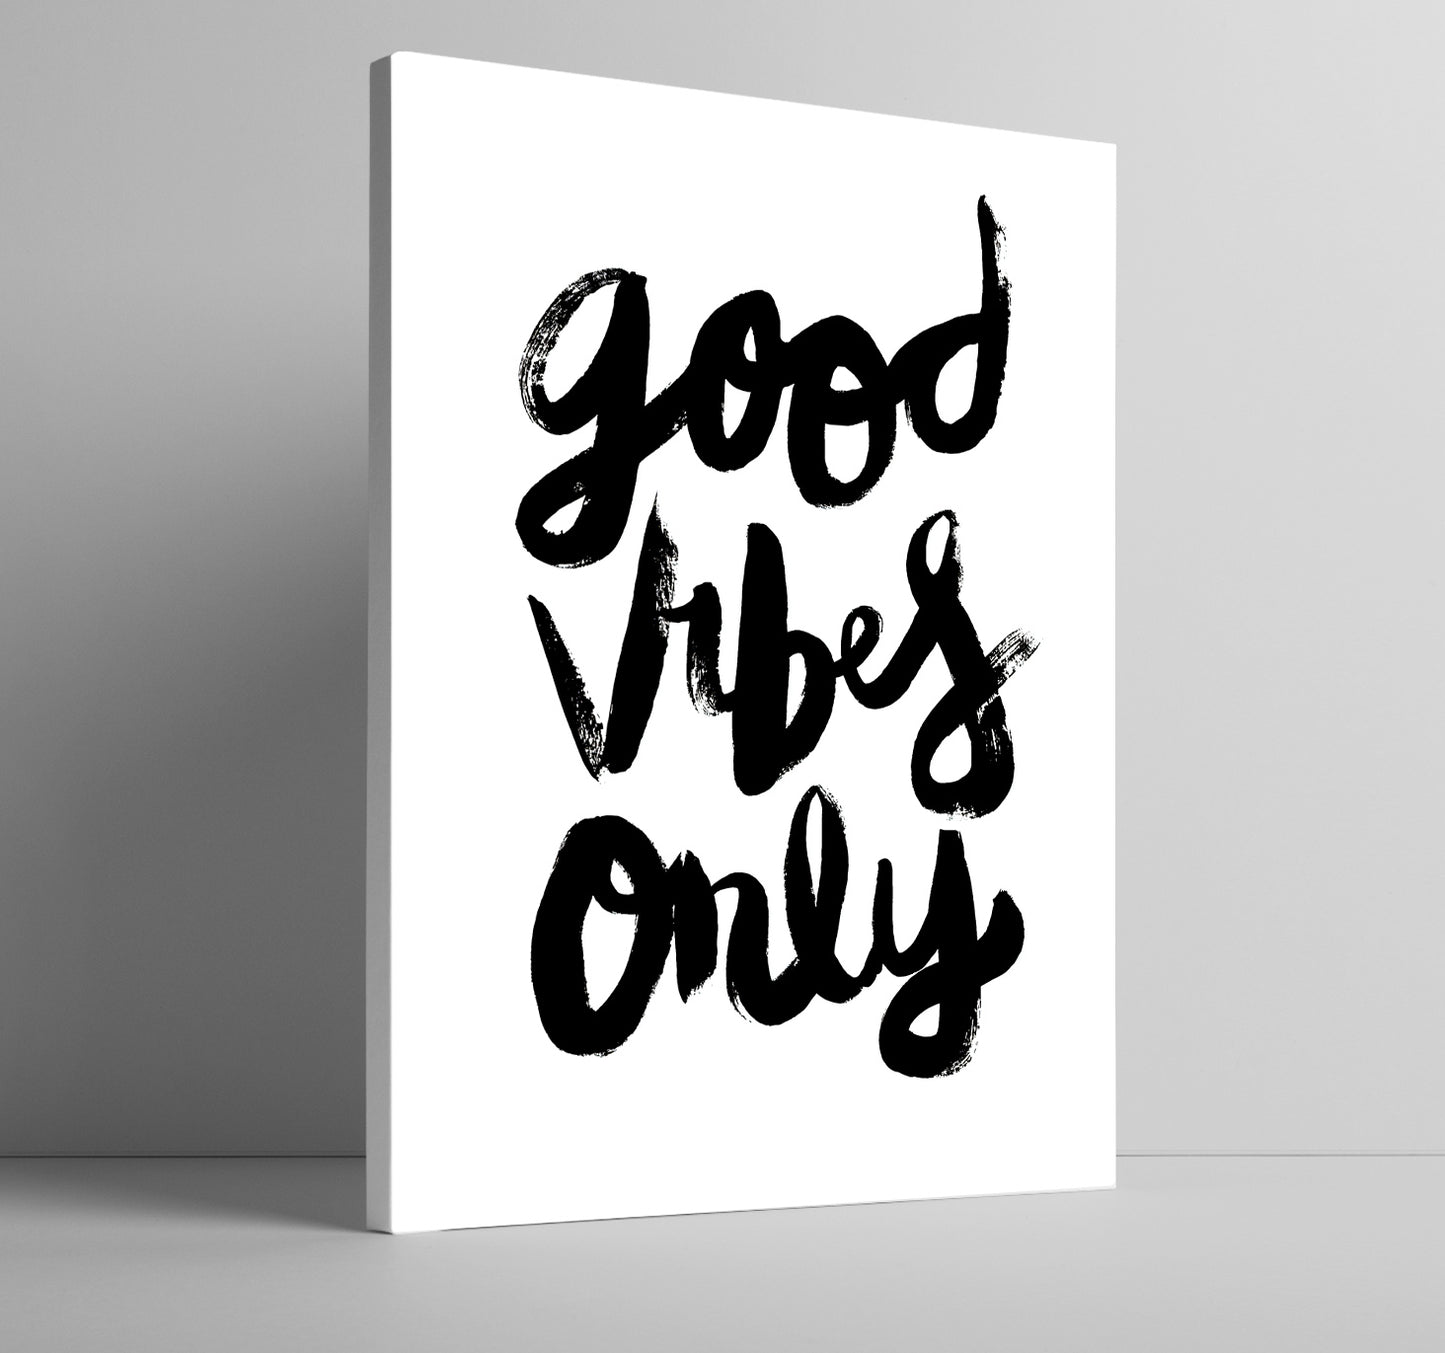 Good vibes only